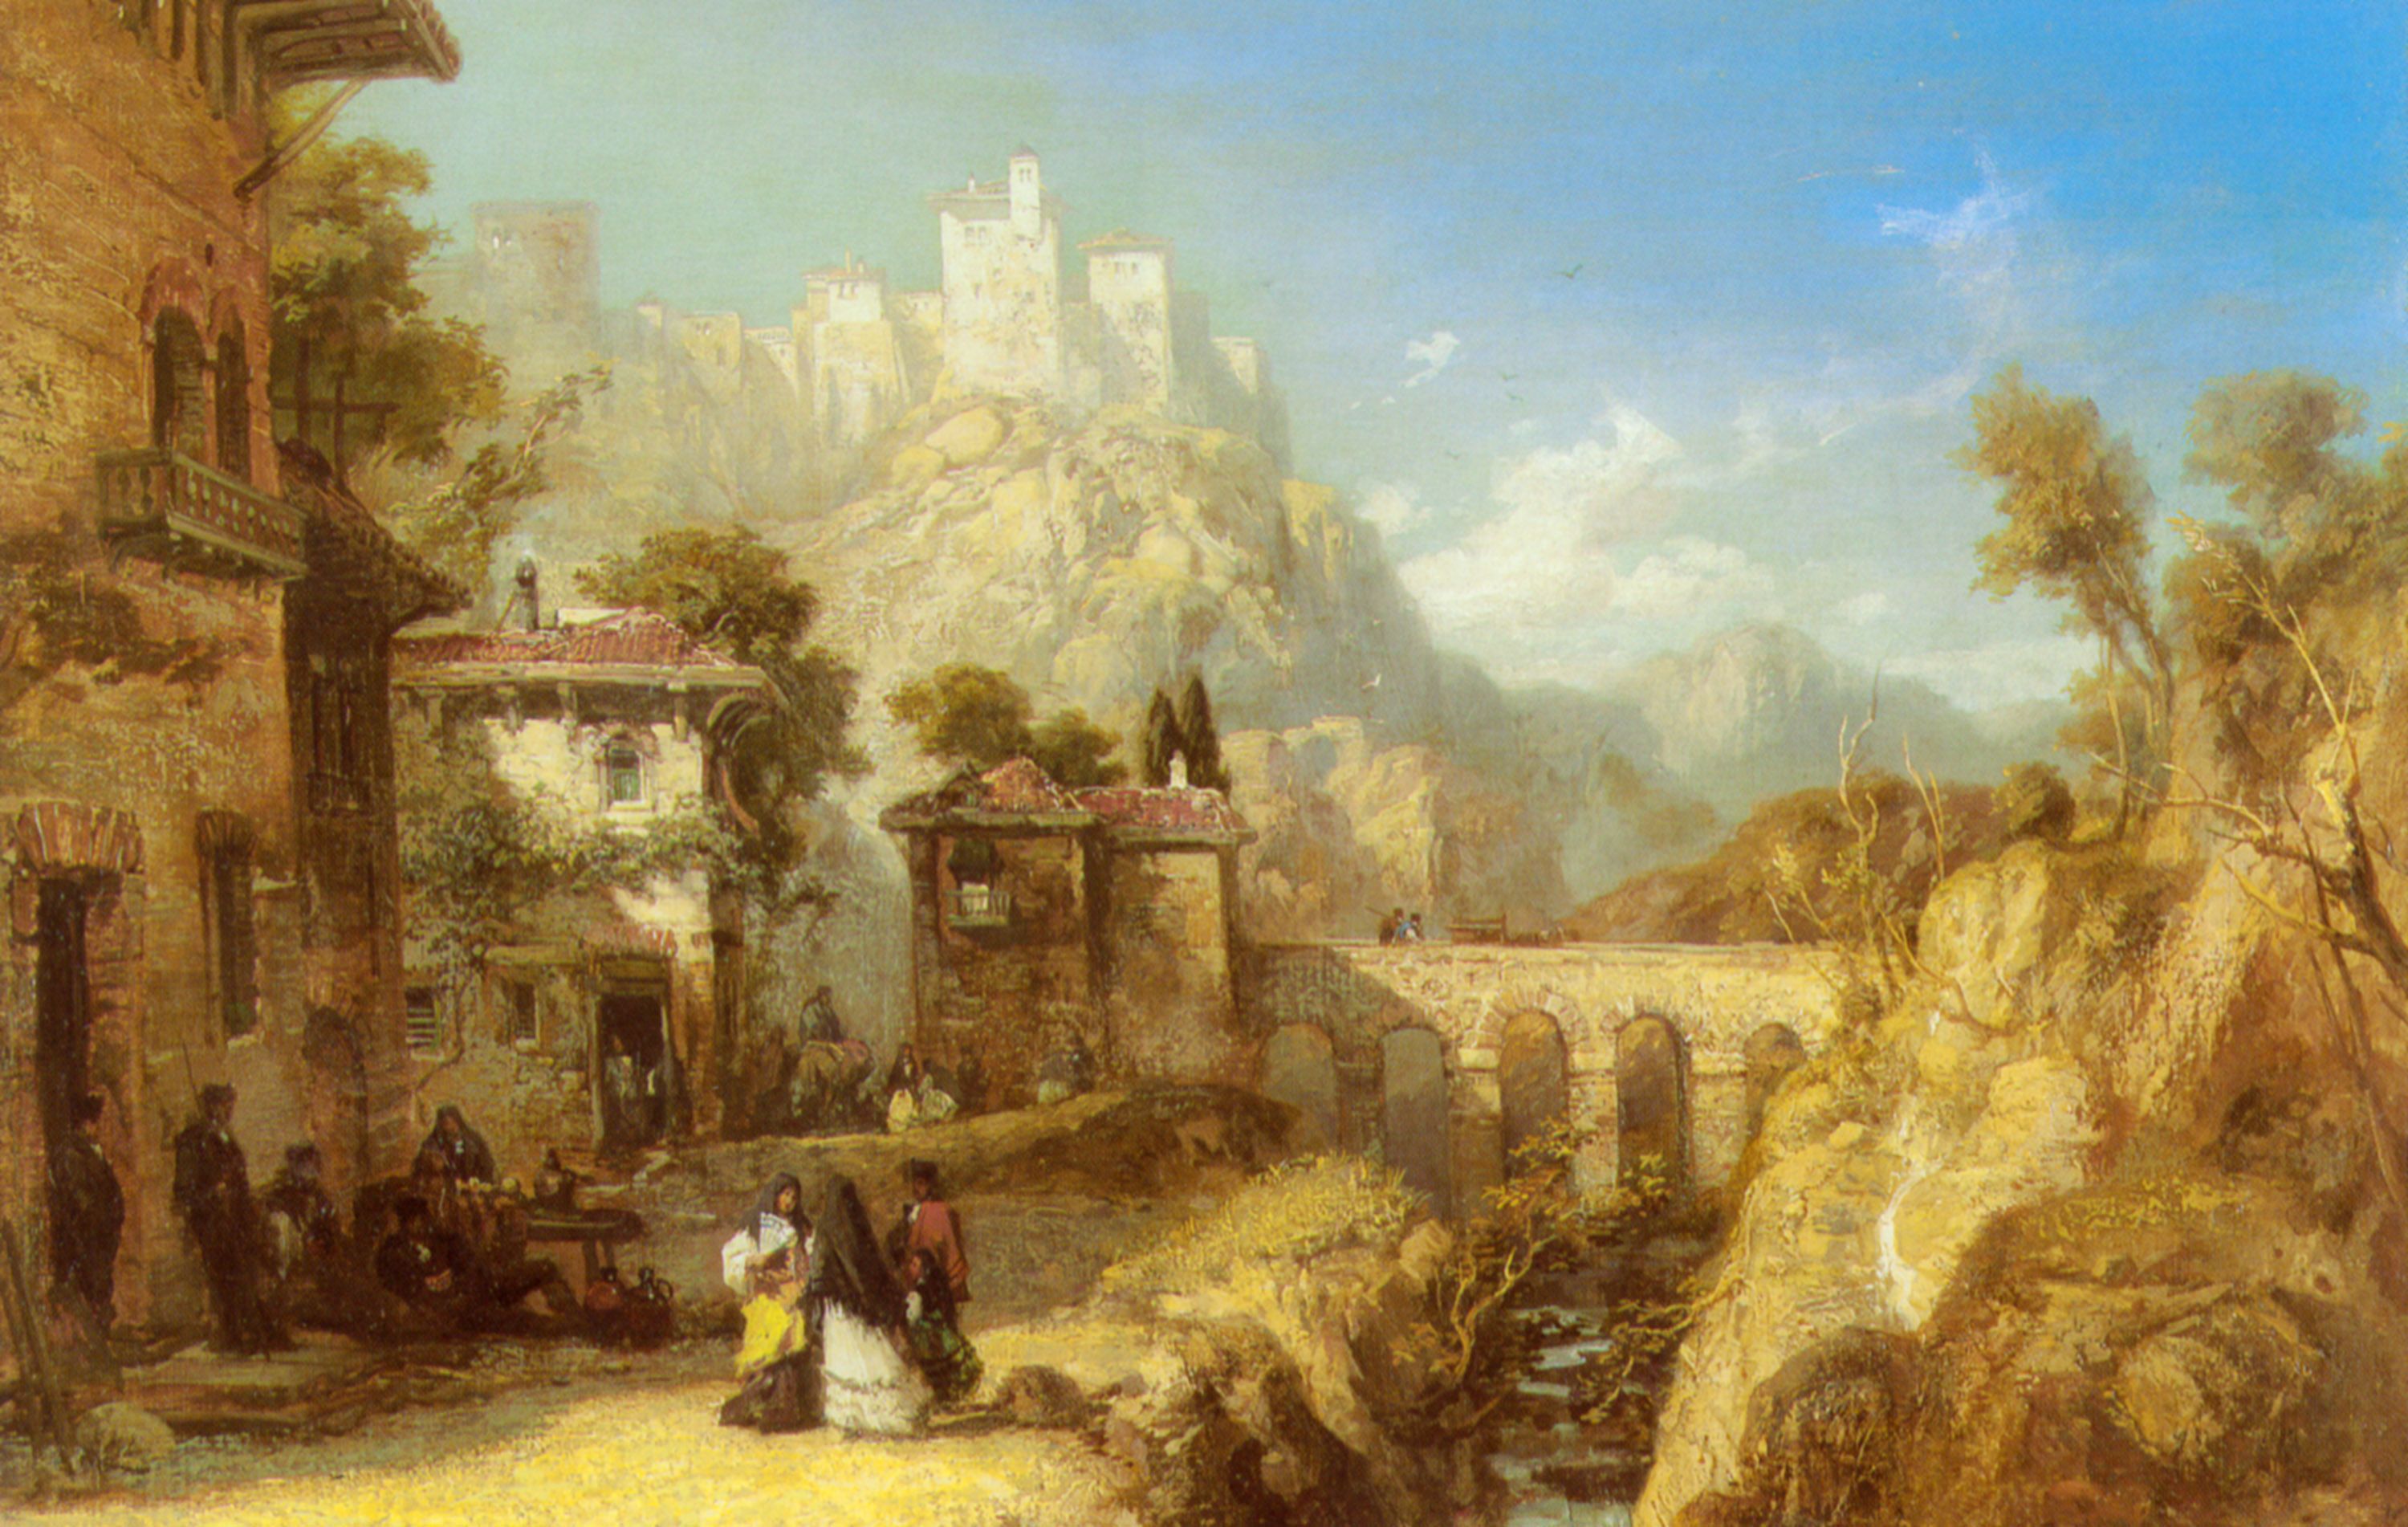 A Mediterranean Landscape with Villagers by James Webb